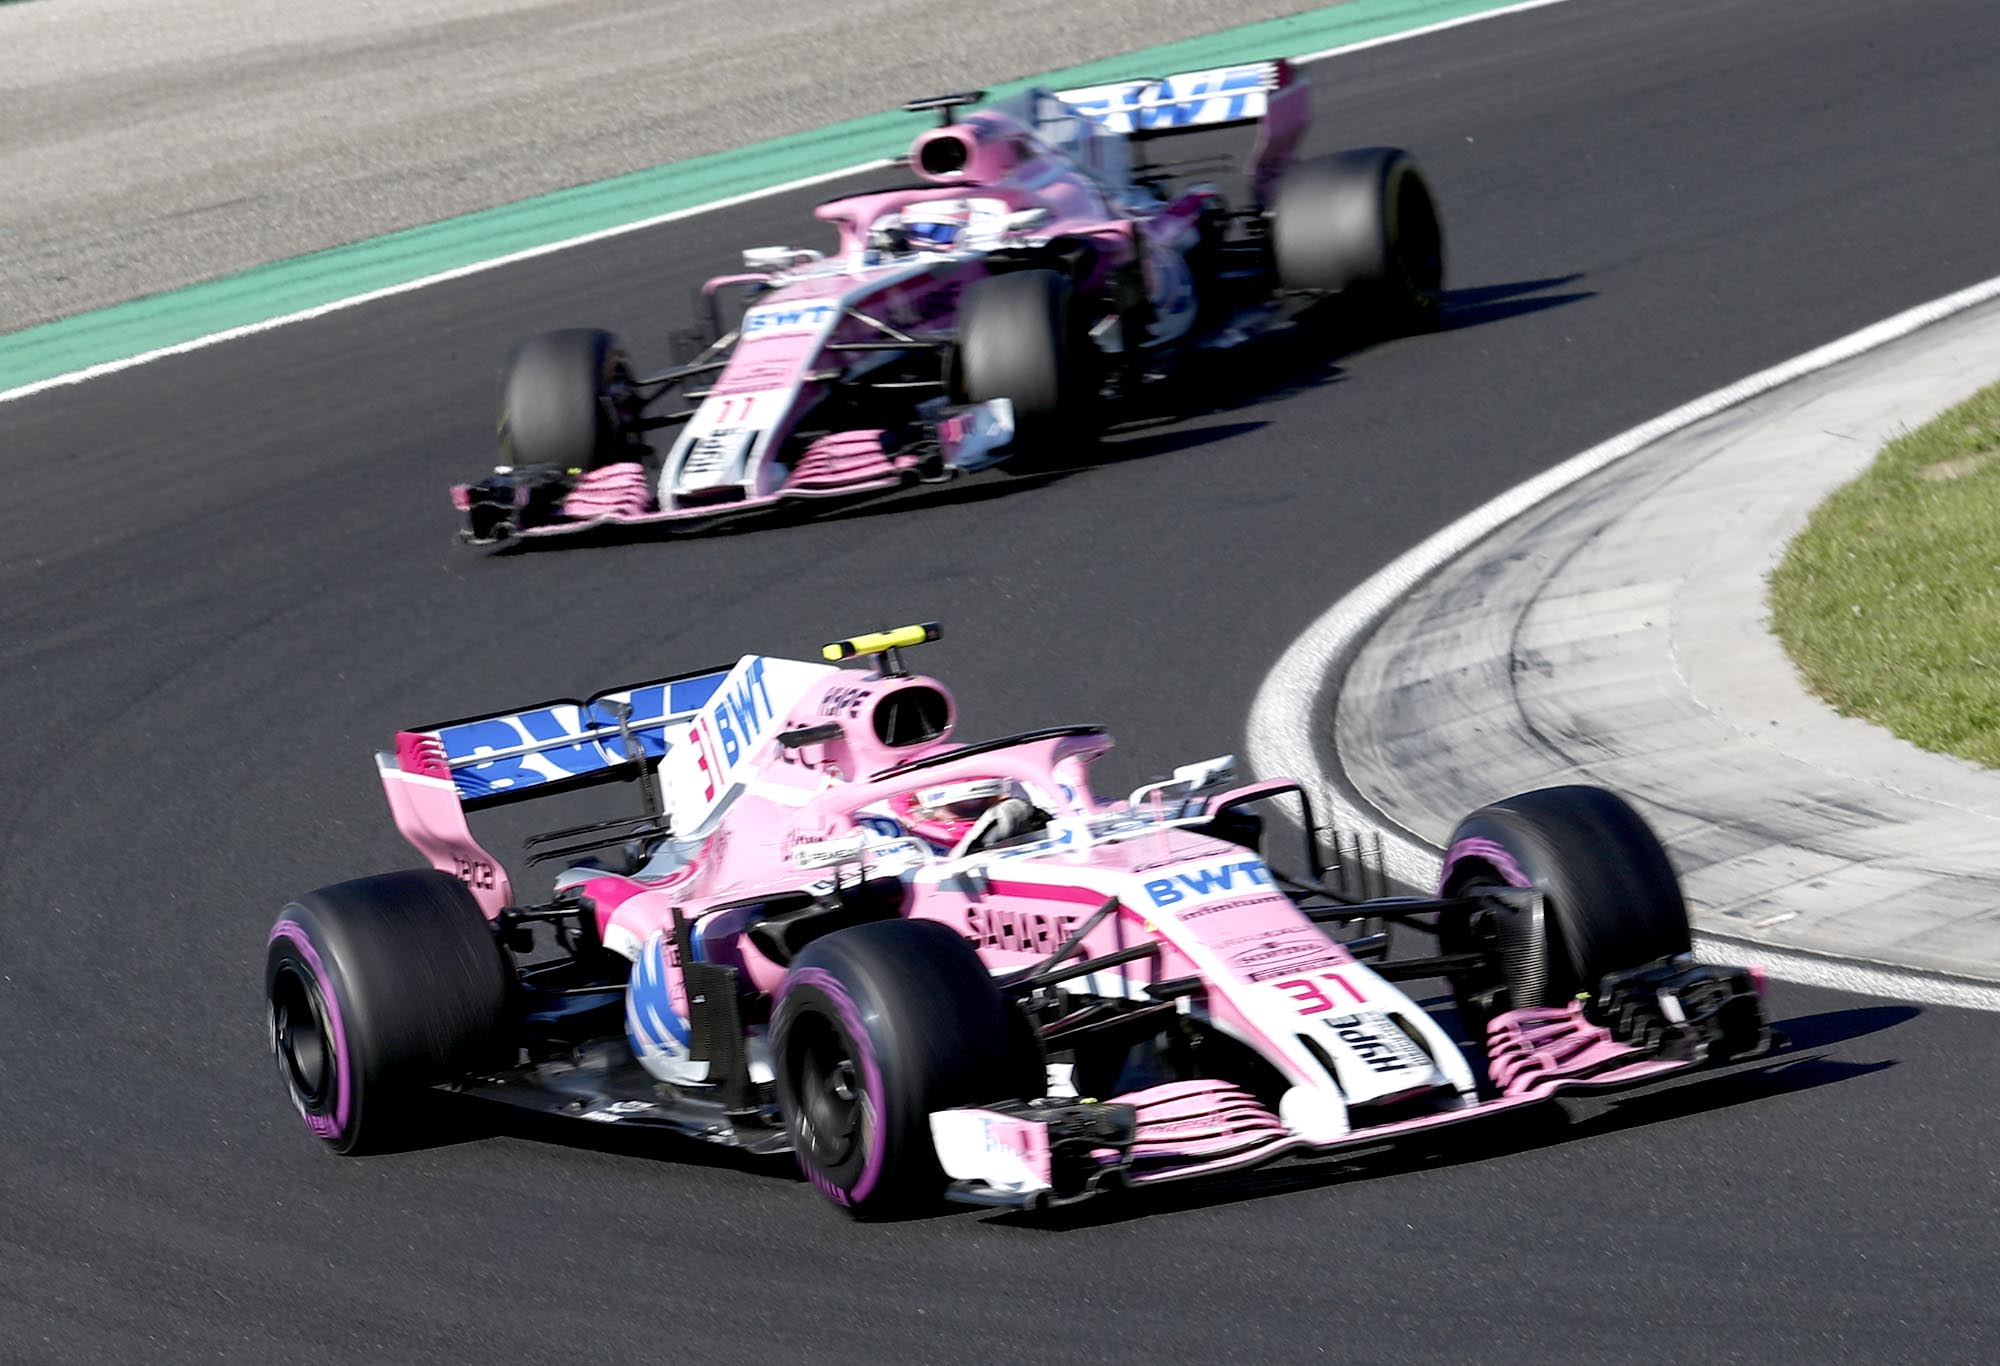 Force India driver Esteban Ocon of France takes a curve followed by teammate Sergio Perez of Mexico during the Hungarian Formula One Grand Prix, at the Hungaroring racetrack in Mogyorod, northeast of Budapest, Sunday, July 29, 2018. (AP Photo/Laszlo Balogh)